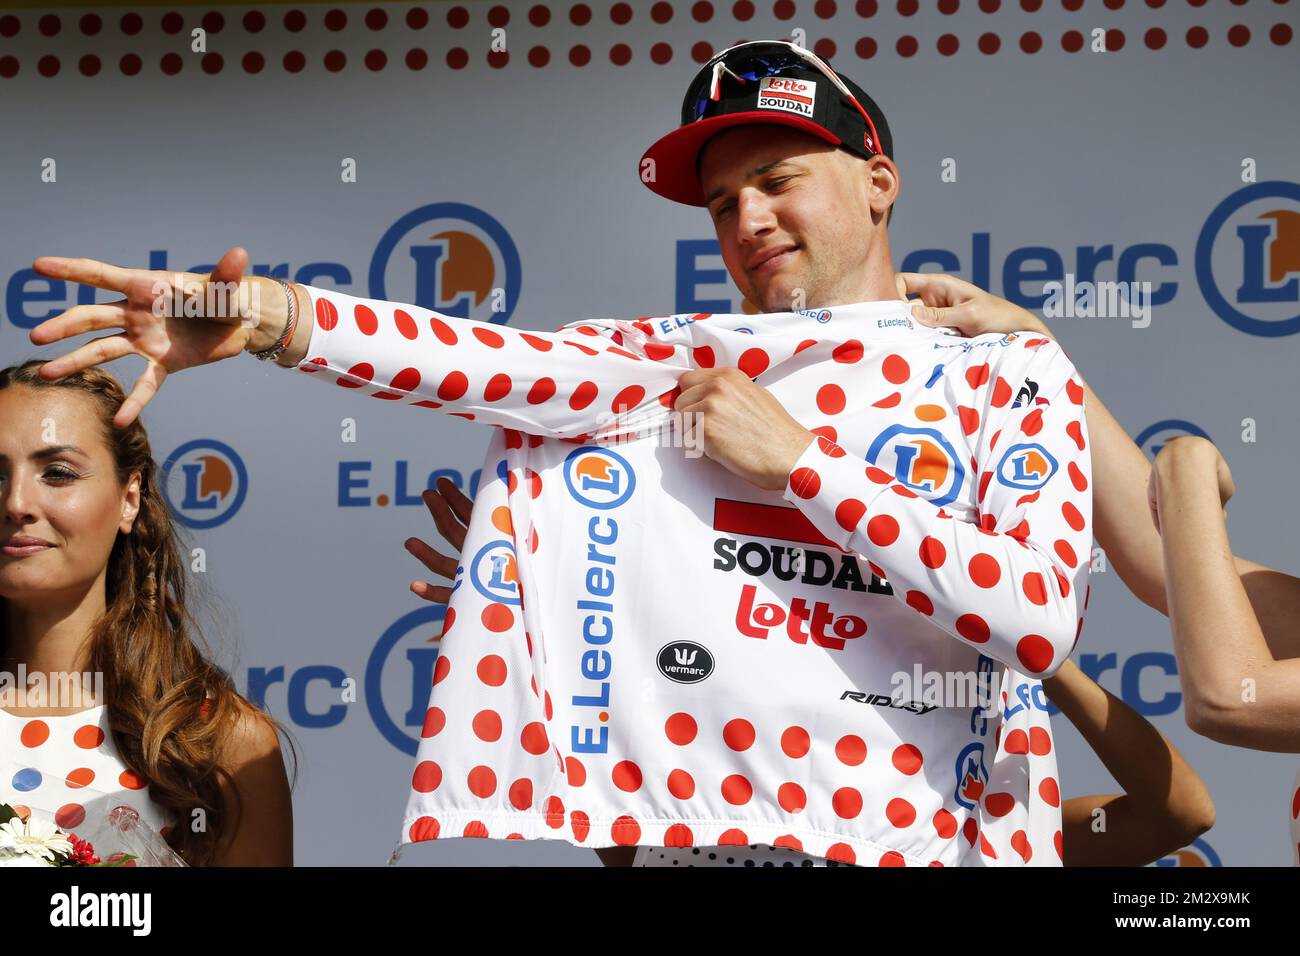 Belgian Tim Wellens of Lotto Soudal wearing the polka dot jersey (maillot a pois rouges - bolletjestrui) of leader in the climbers ranking after the third stage of the 106th edition of the Tour de France cycling race, a 215 km from Binche in Belgium to Epernay in France, Monday 08 July 2019. This year's Tour de France starts in Brussels and takes place from July 6th to July 28th. BELGA PHOTO YUZURU SUNADA  Stock Photo